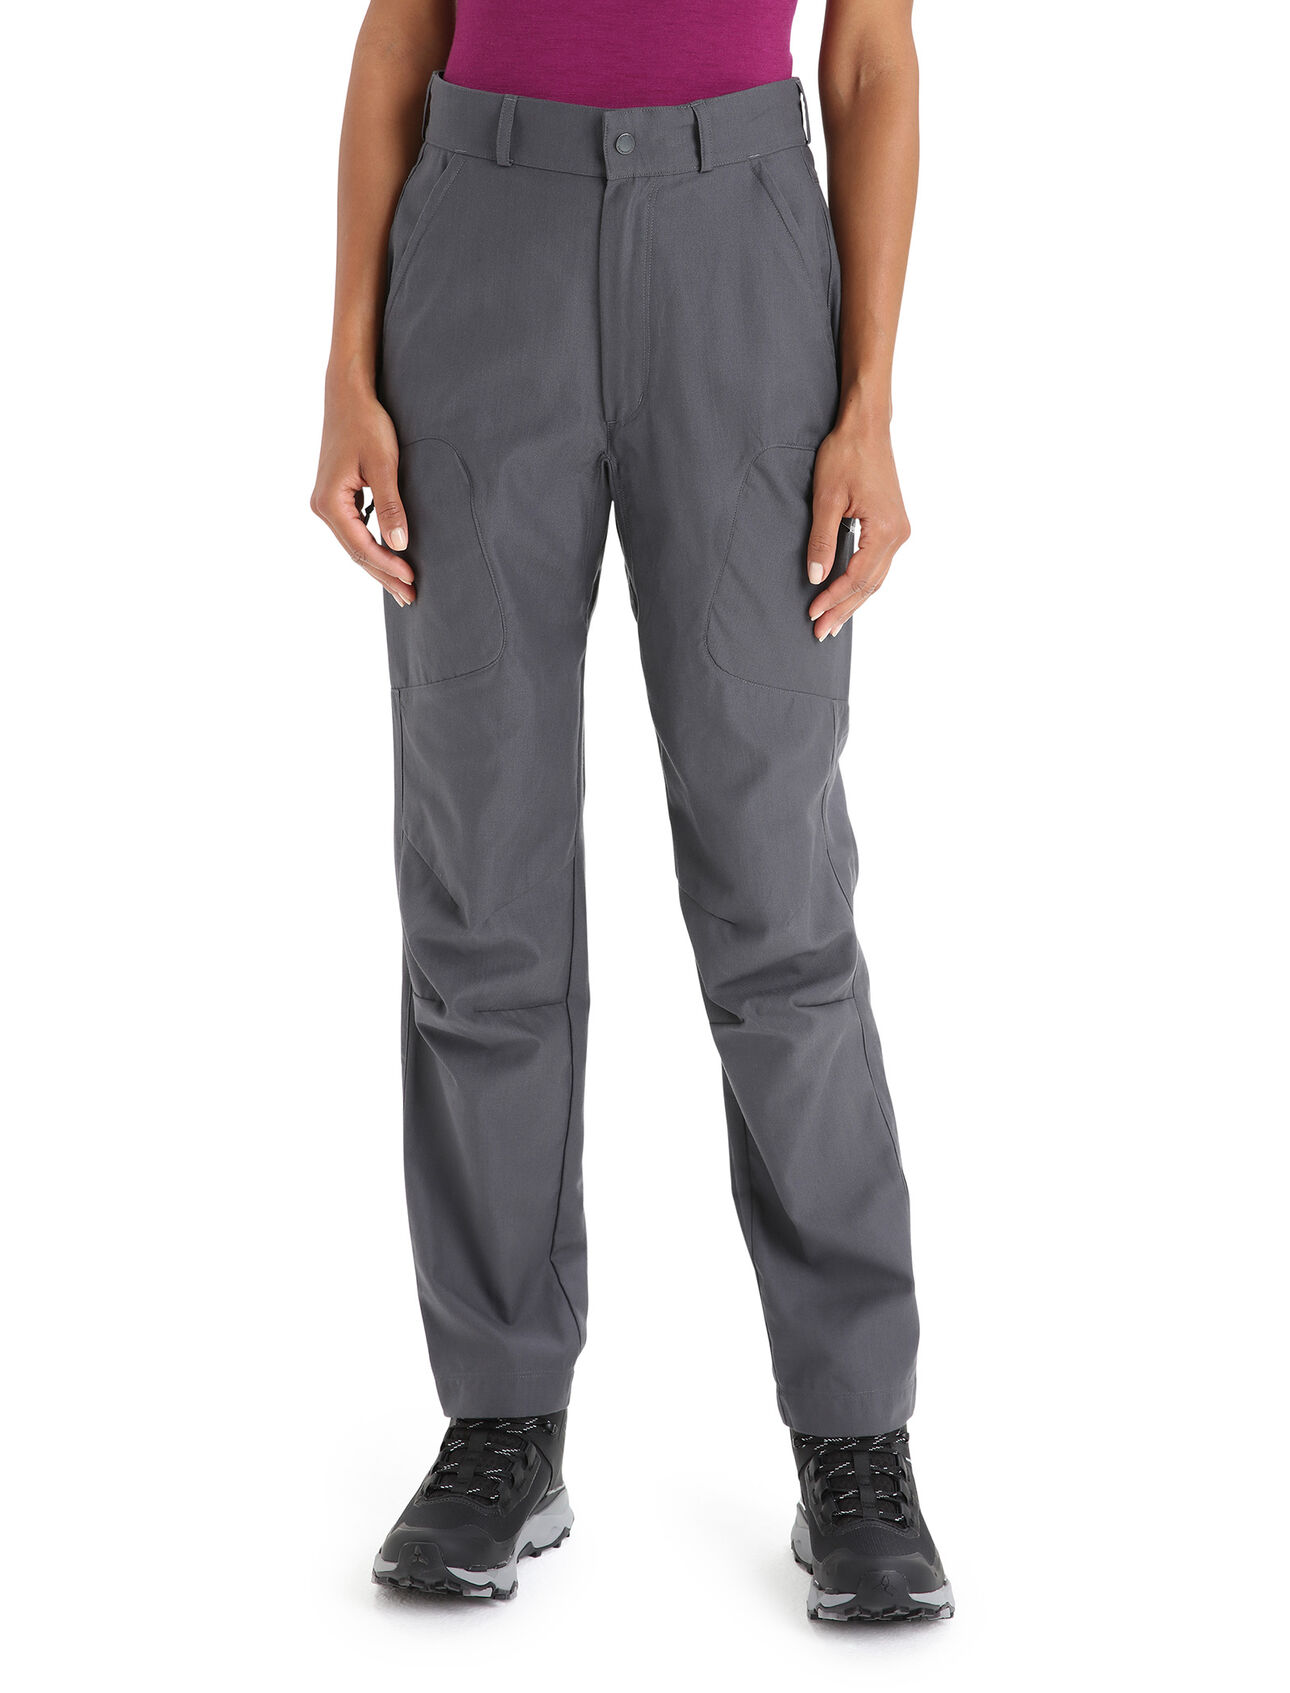 Womens Merino Hike Pants A durable and dependable mountain pant made from a unique blend of merino wool and organically grown cotton, the Hike Pants are perfect for mountain adventures of all kinds. 